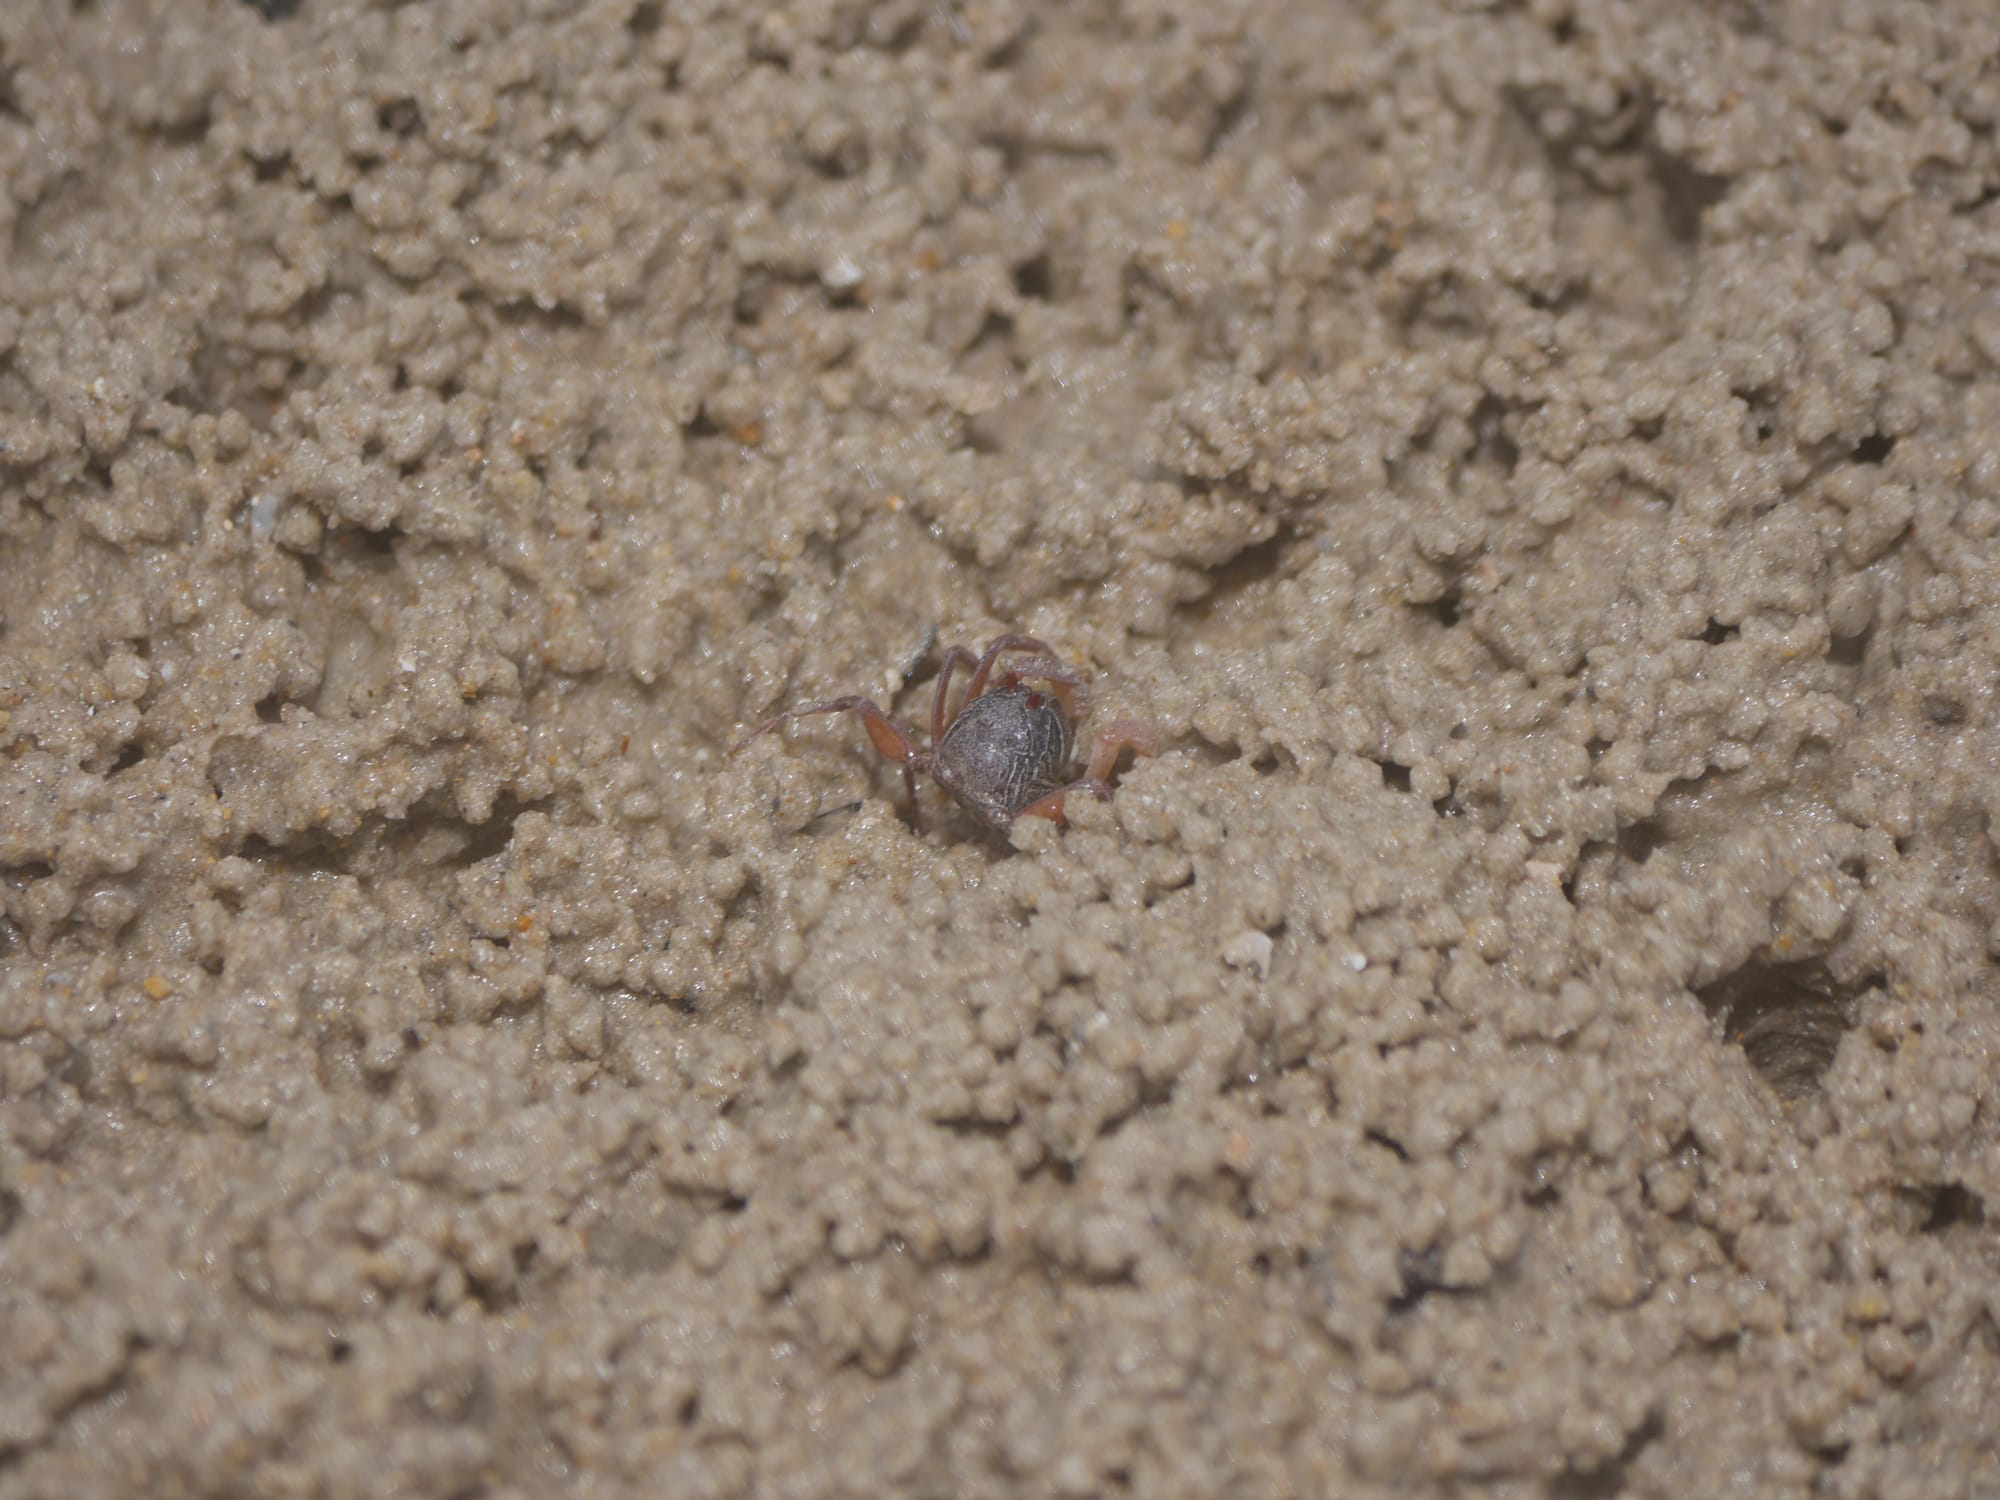 Photo by Author — burrowing crab on the beach at the Andaman Hotel, Langkawi, Malaysia